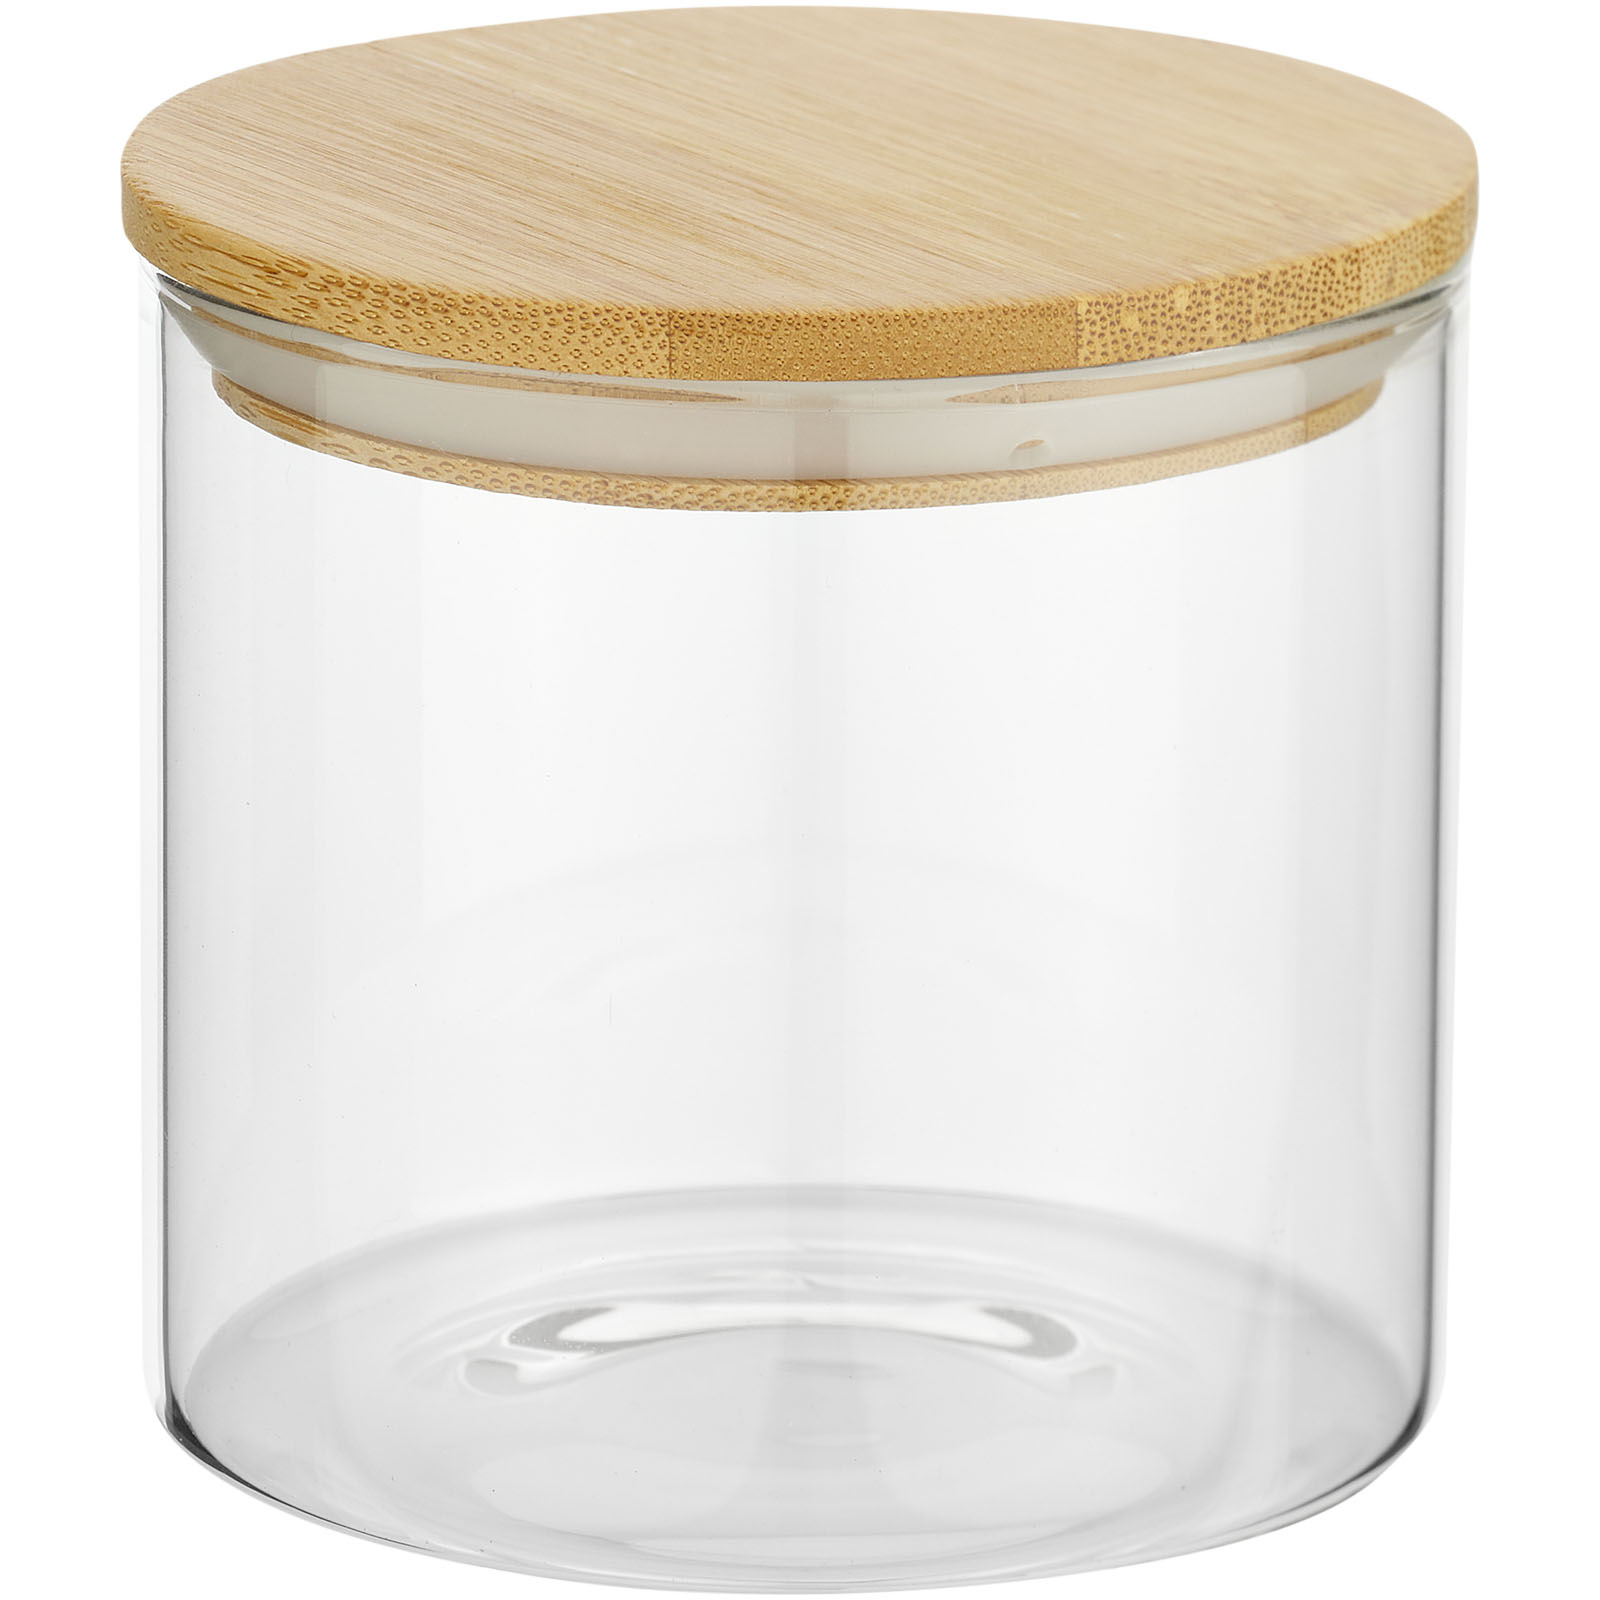 Advertising Kitchenware - Boley 320 ml glass food container - 0